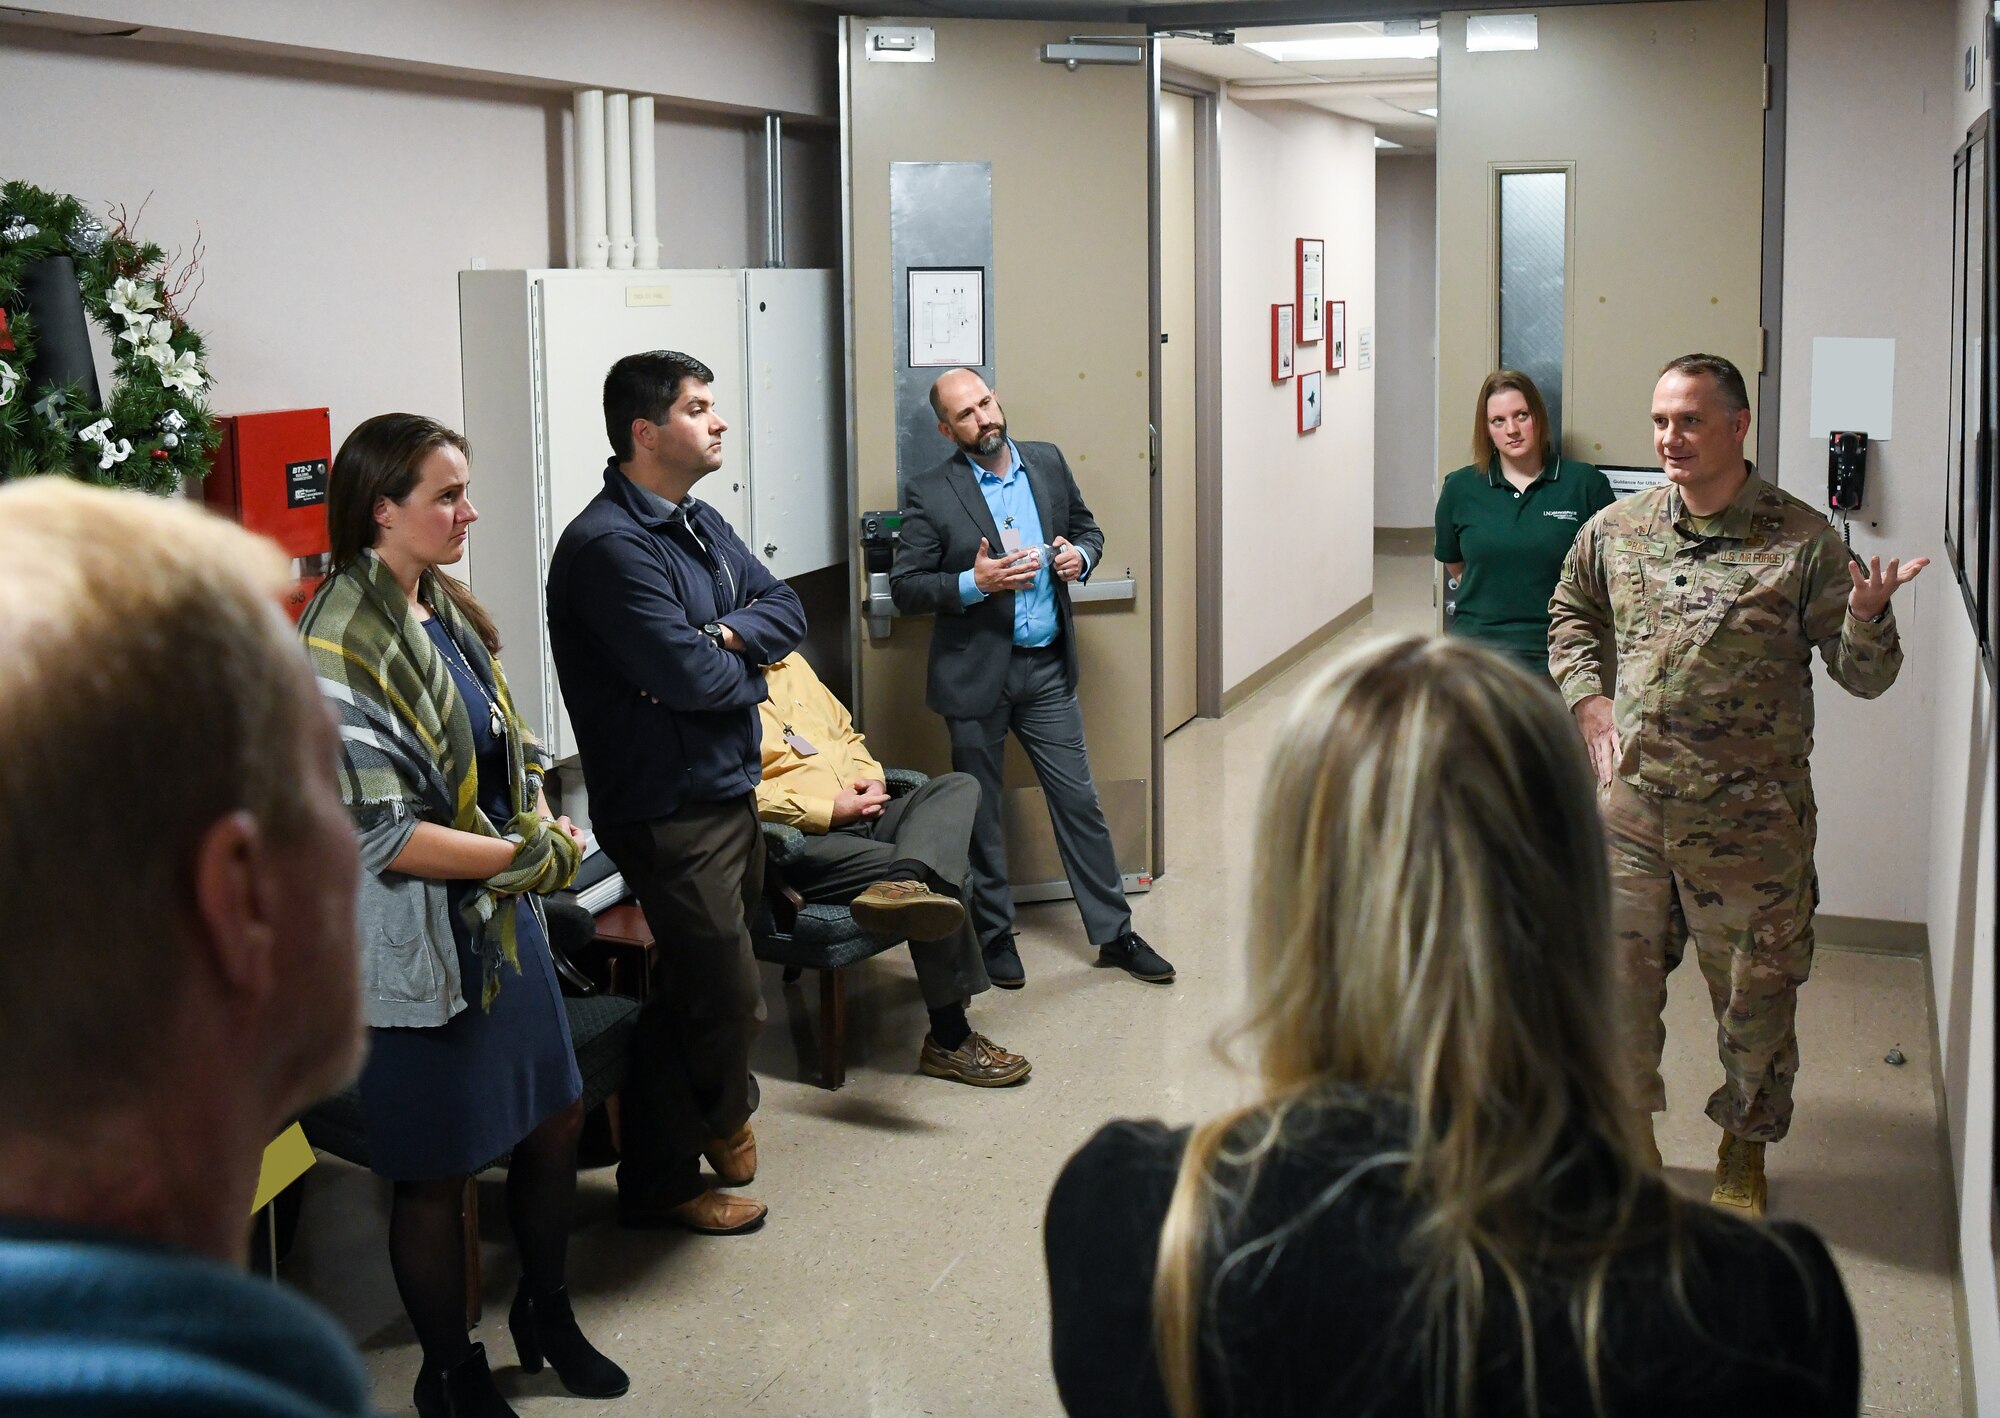 Lt. Col. Dayvid Prahl, commander, 718th Test Squadron, speaks to a group of people about the various test capabilities the squadron offers for testing space and missile systems as part an Air Force Test Center group touring Arnold Air Force Base, Tennessee.